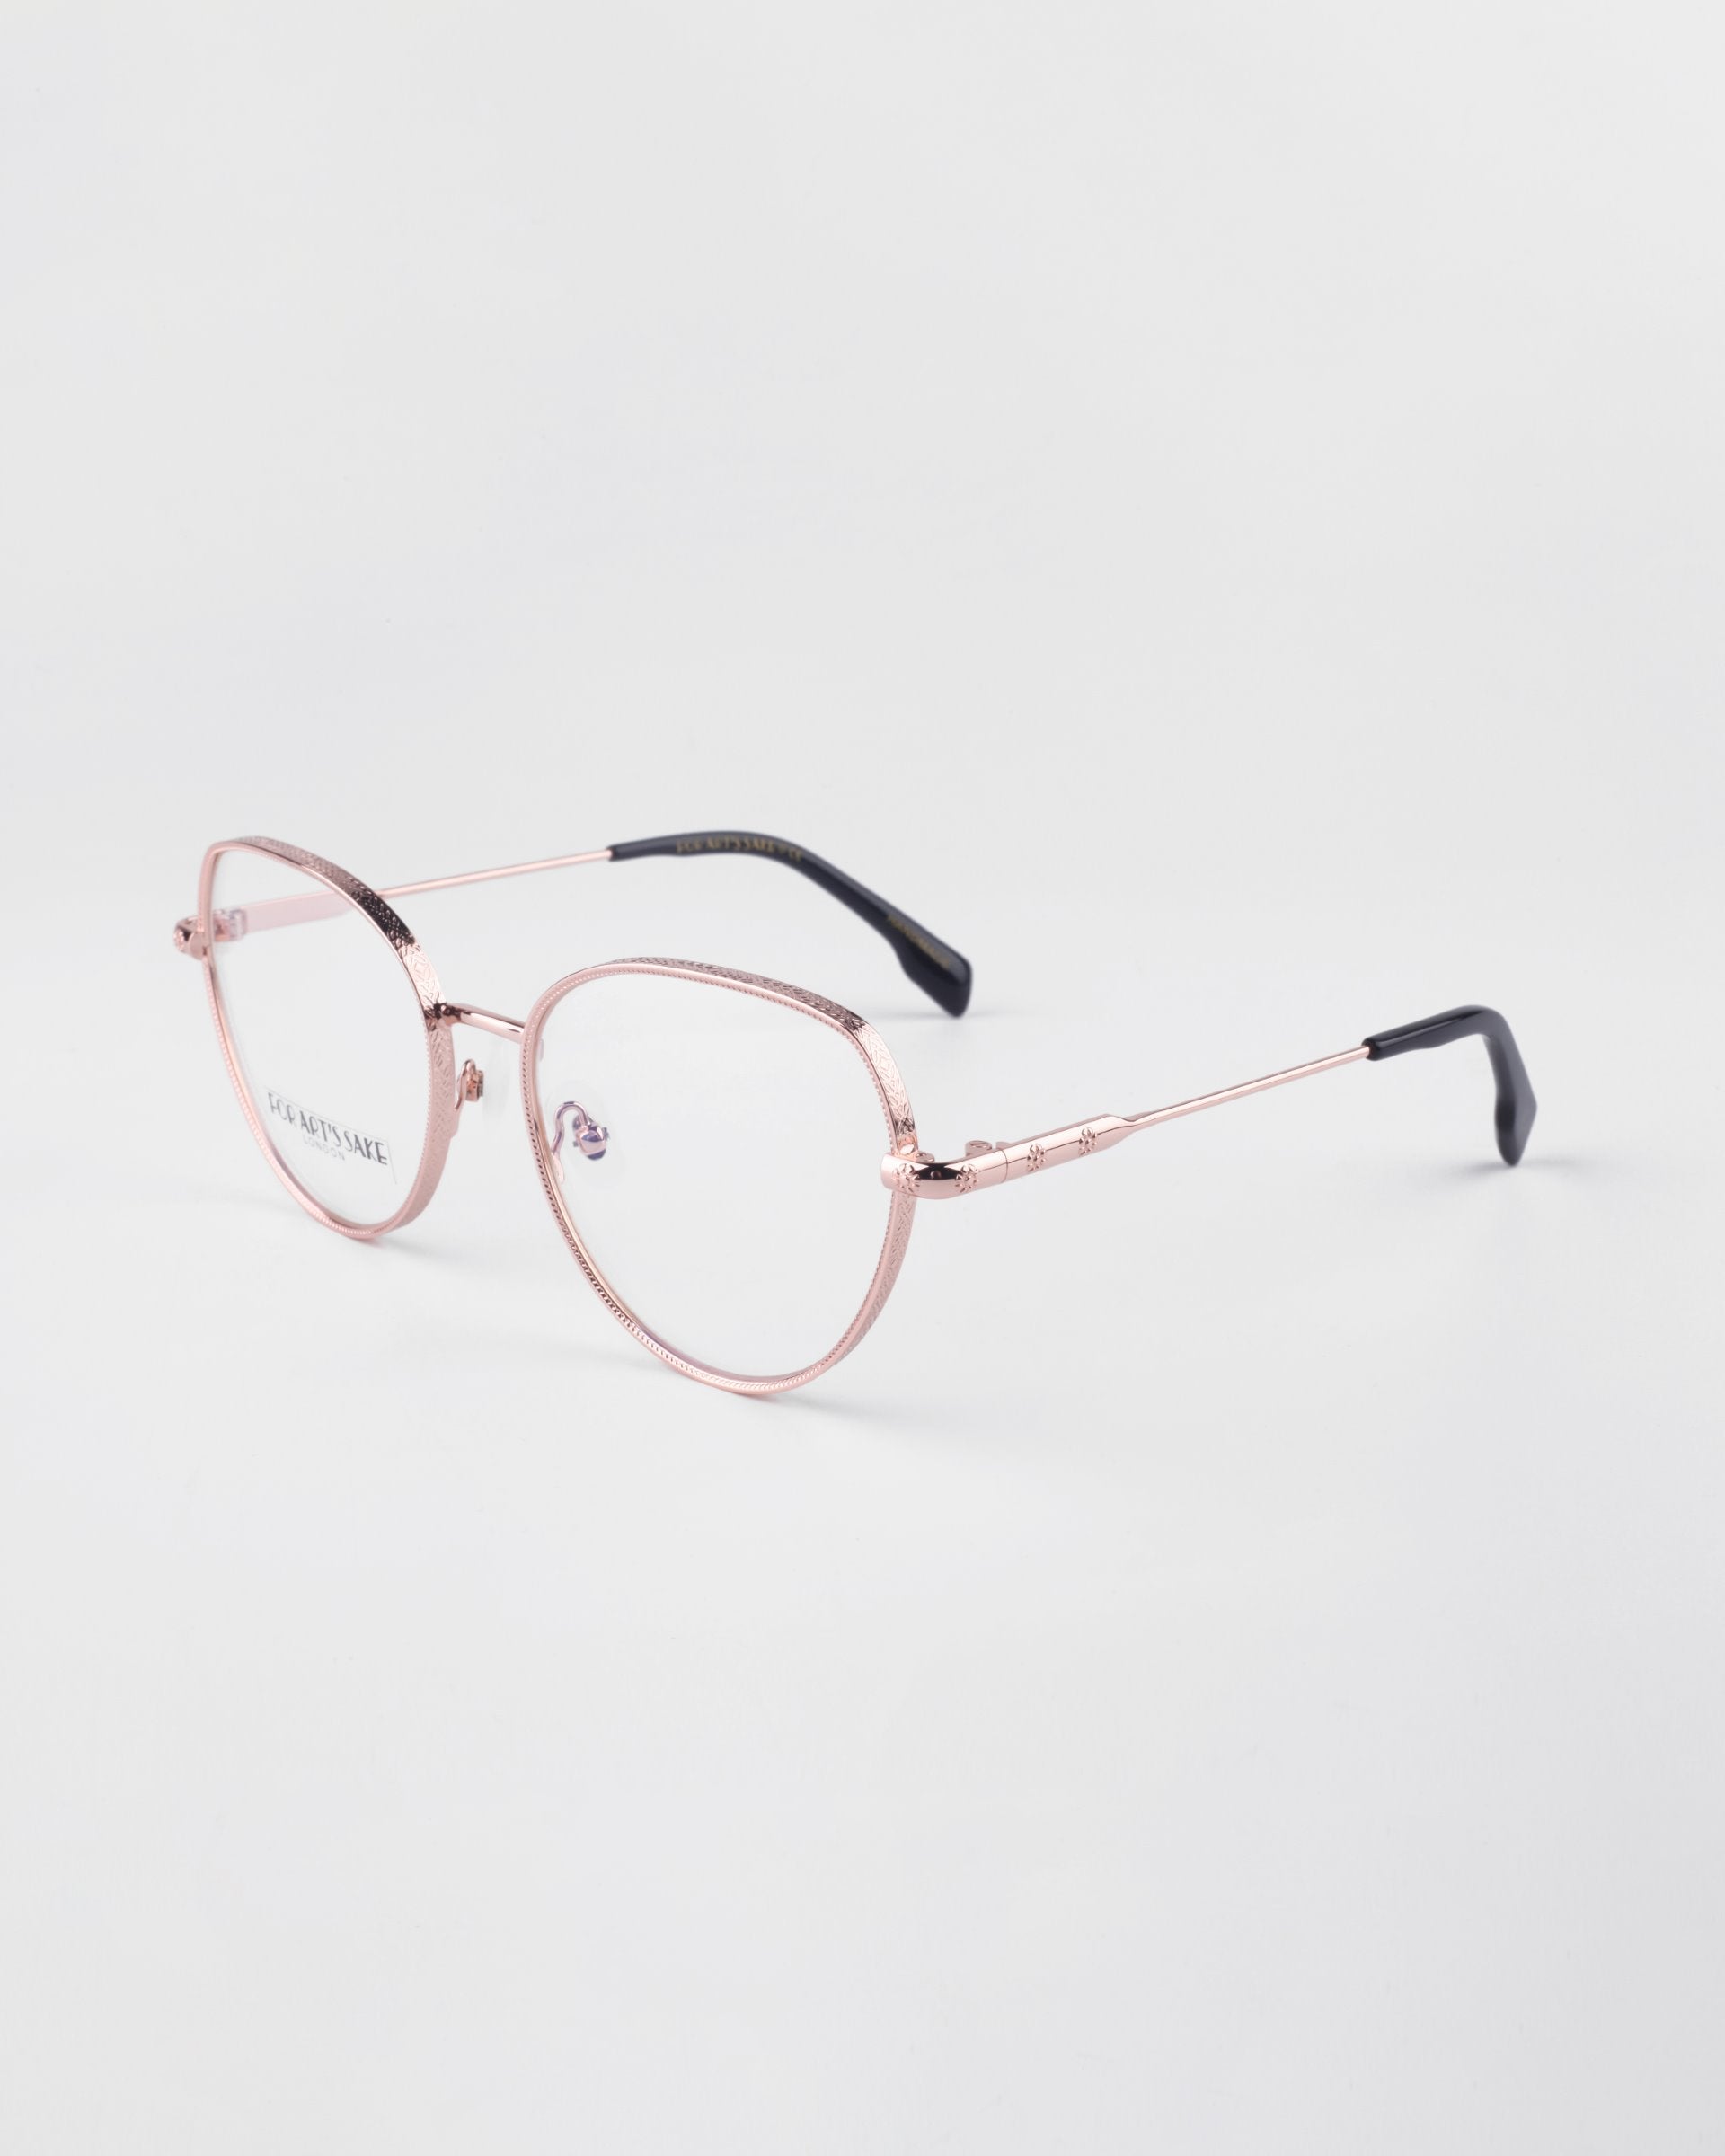 A pair of round, 18-karat gold-plated eyeglasses with a light pink tint. The **Frida Floral** glasses by **For Art's Sake®** have thin frames with nose pads and black tips at the ends of the temples, featuring blue light filter lenses. They are placed on a simple, white background.